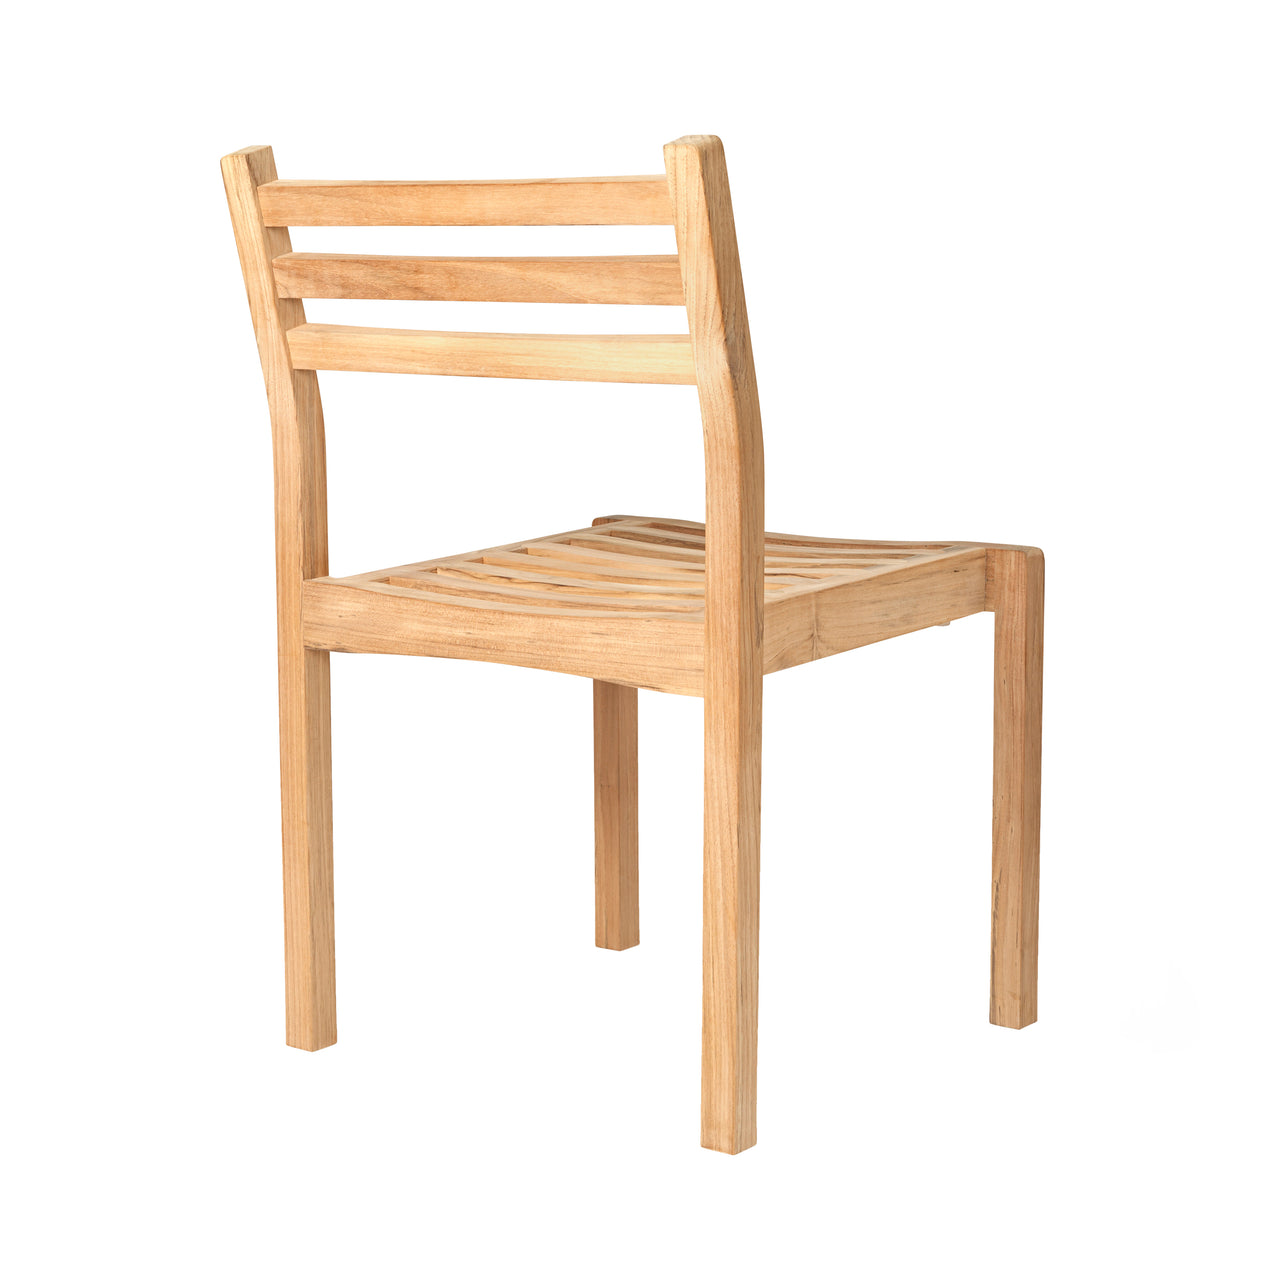 AH501 Outdoor Dining Chair: Without Cushion